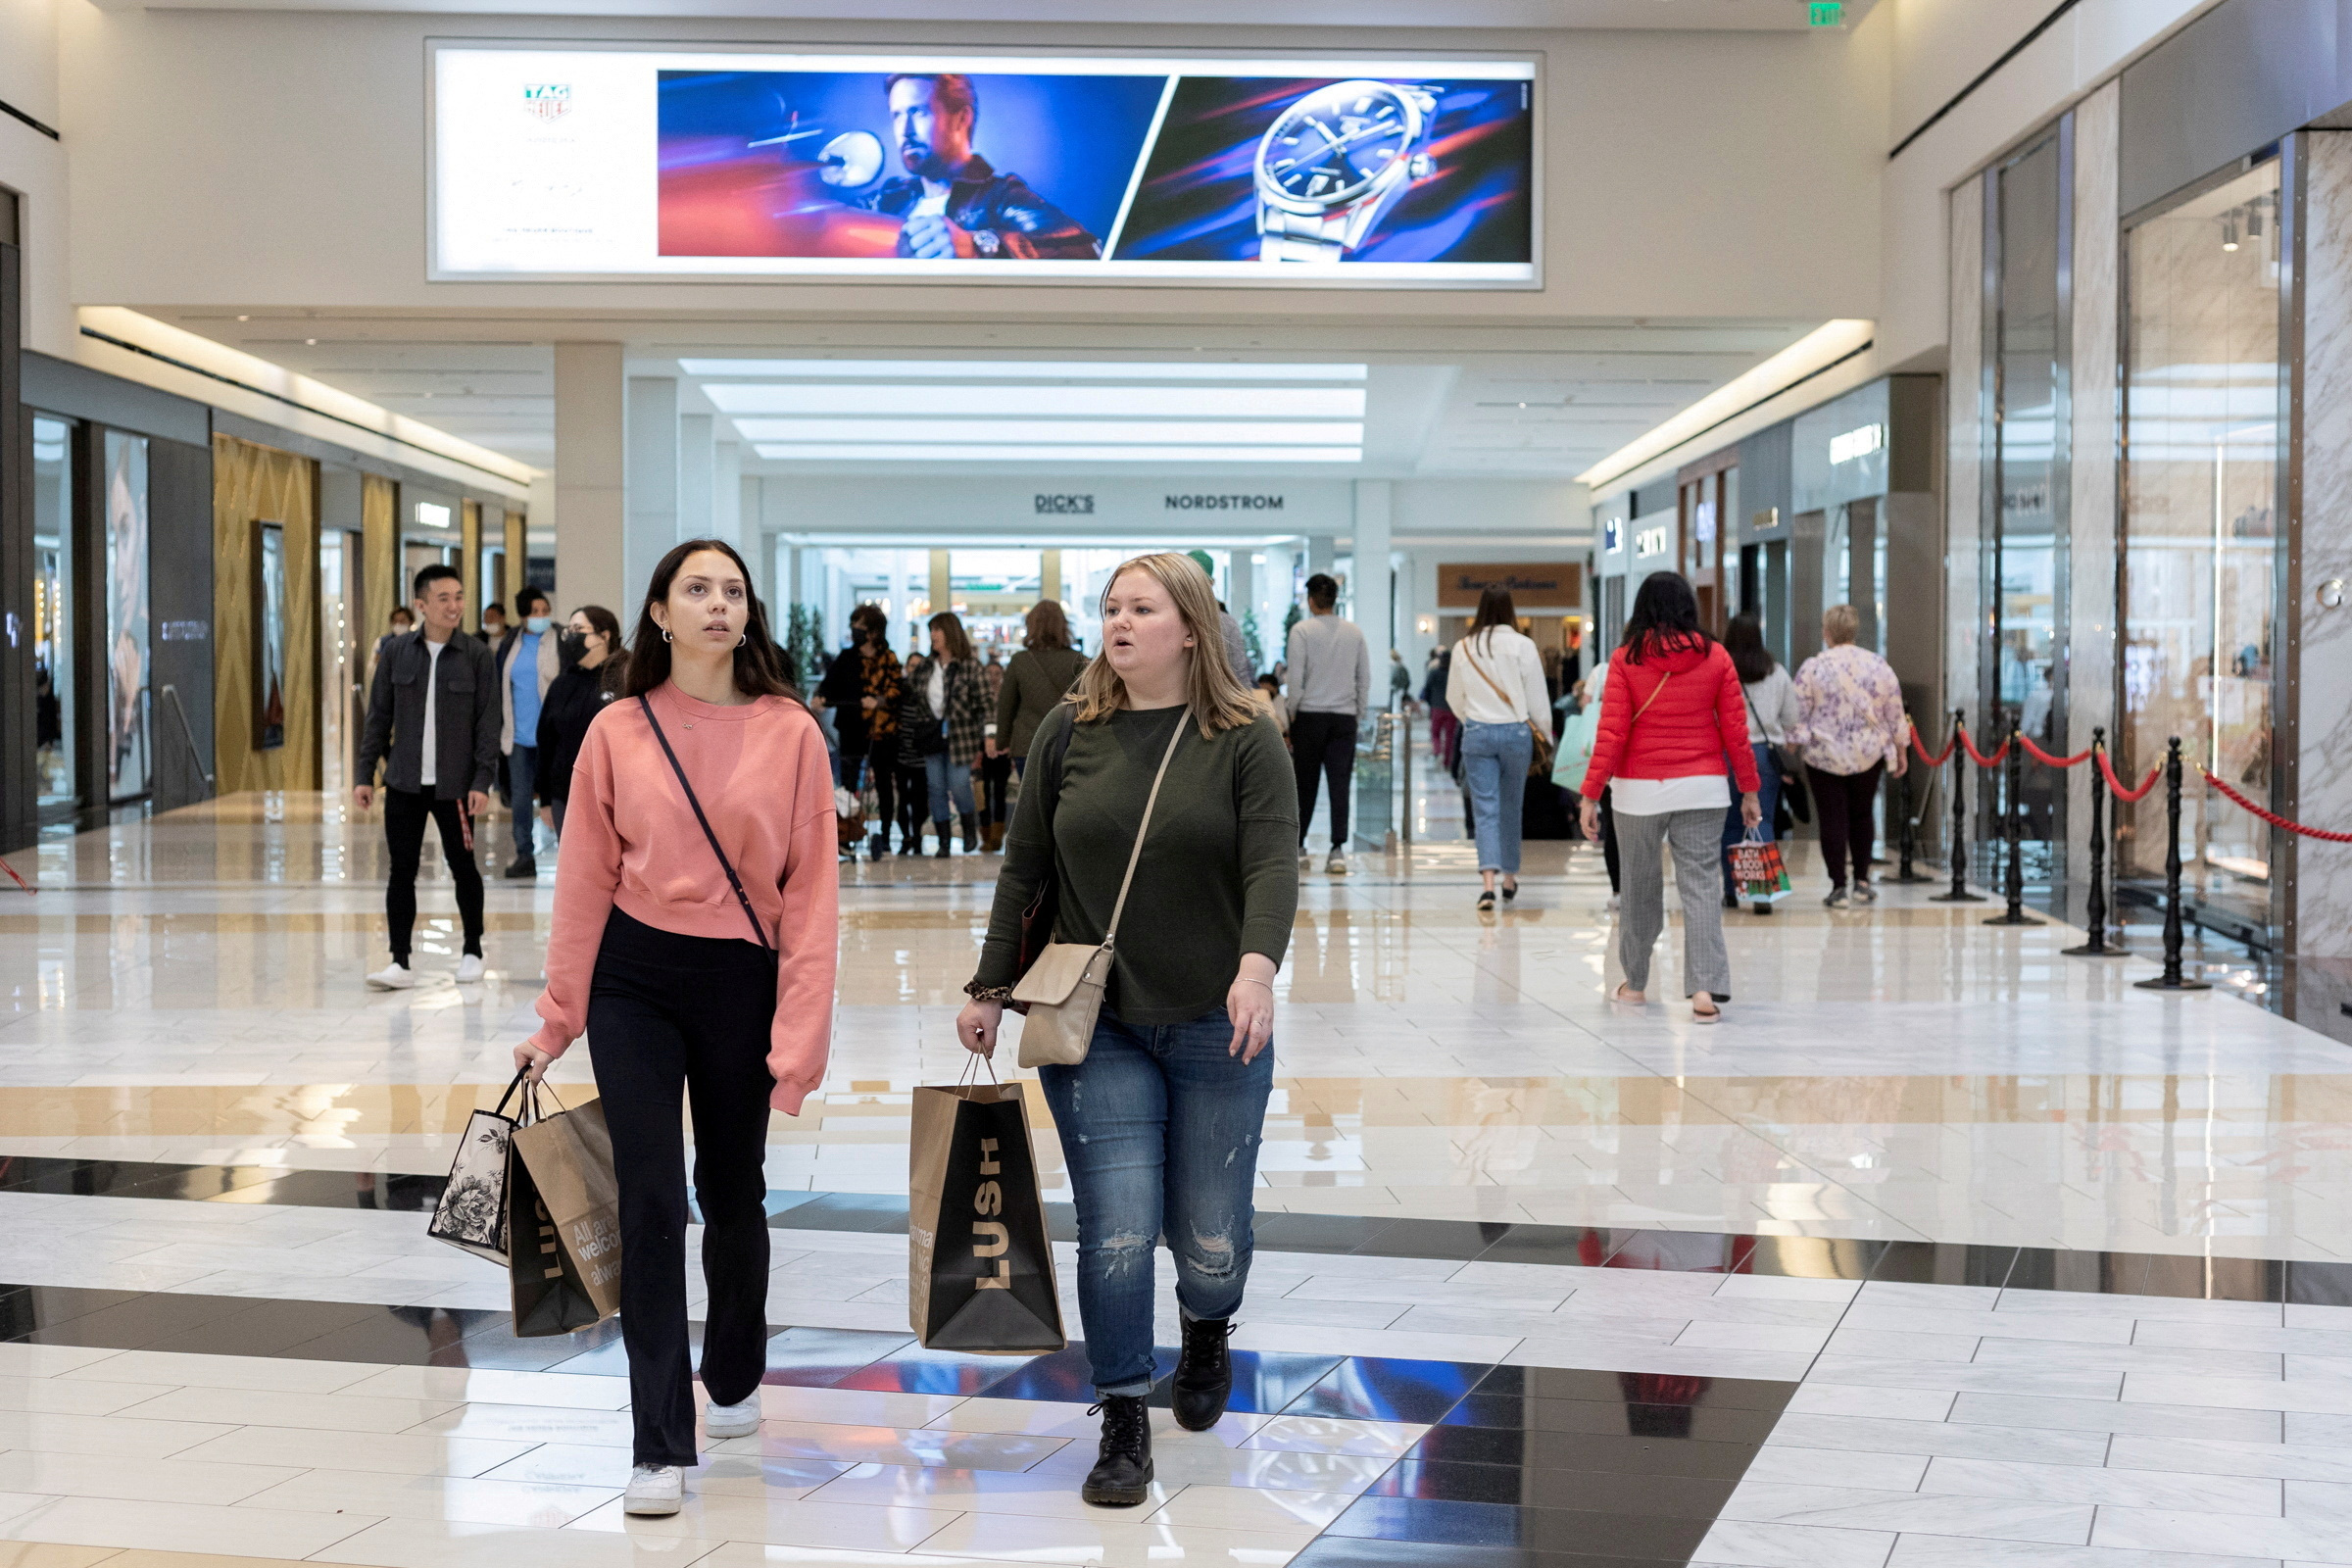 People walk inside King of Prussia shopping mall in Pennsylvania